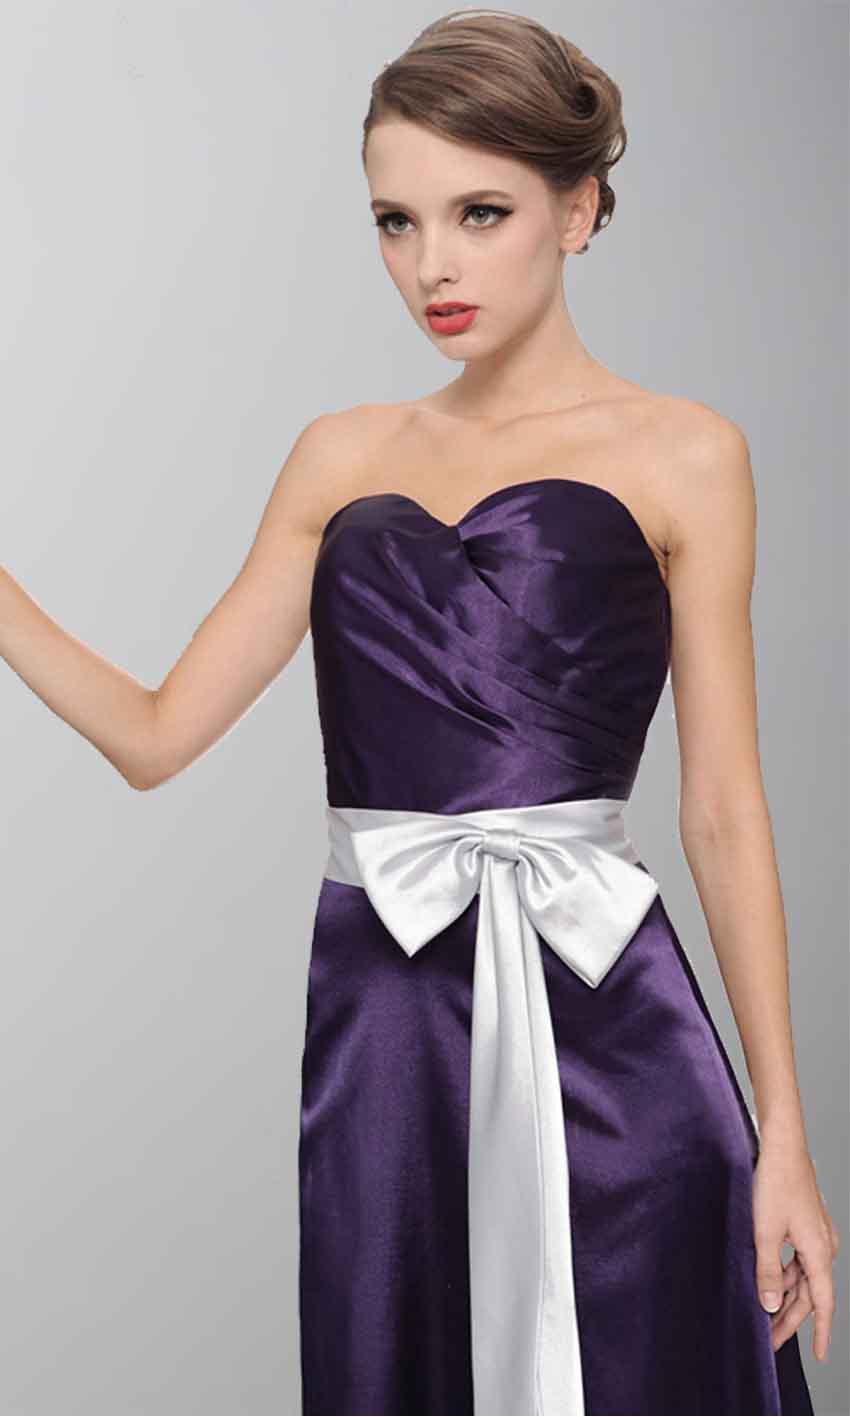 Свадьба - Purple Strapless Sweetheart Satin Long Bridesmaid Dress KSP151 [KSP151] - £83.00 : Cheap Prom Dresses Uk, Bridesmaid Dresses, 2014 Prom & Evening Dresses, Look for cheap elegant prom dresses 2014, cocktail gowns, or dresses for special occasions? kissprom